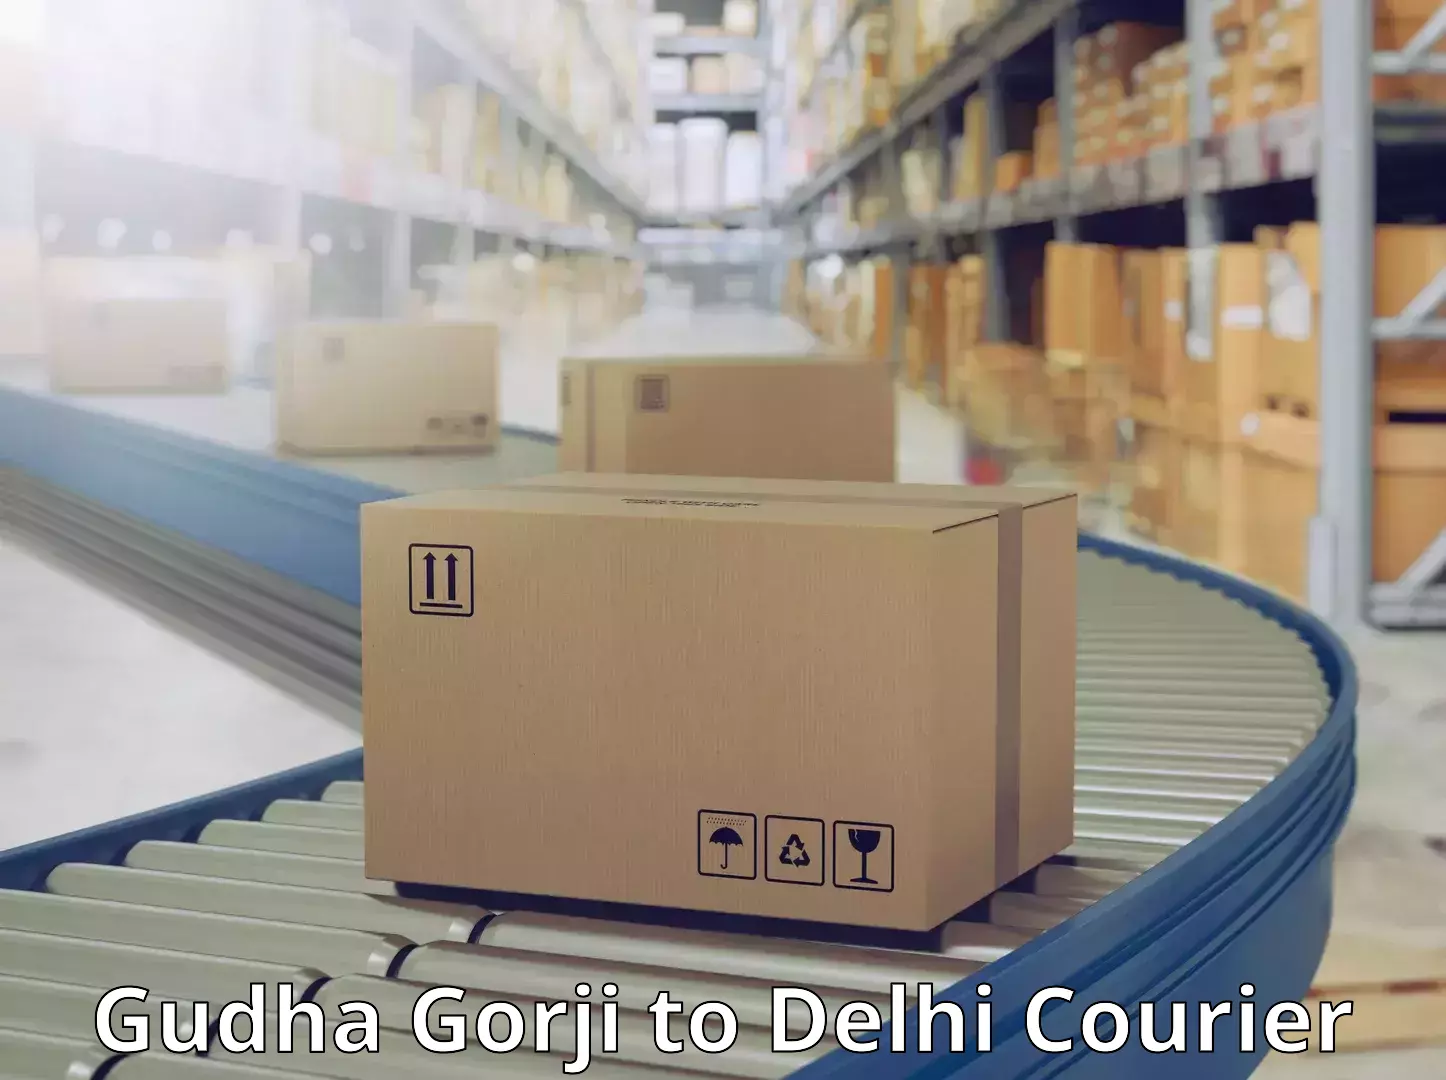 Sustainable shipping practices in Gudha Gorji to Delhi